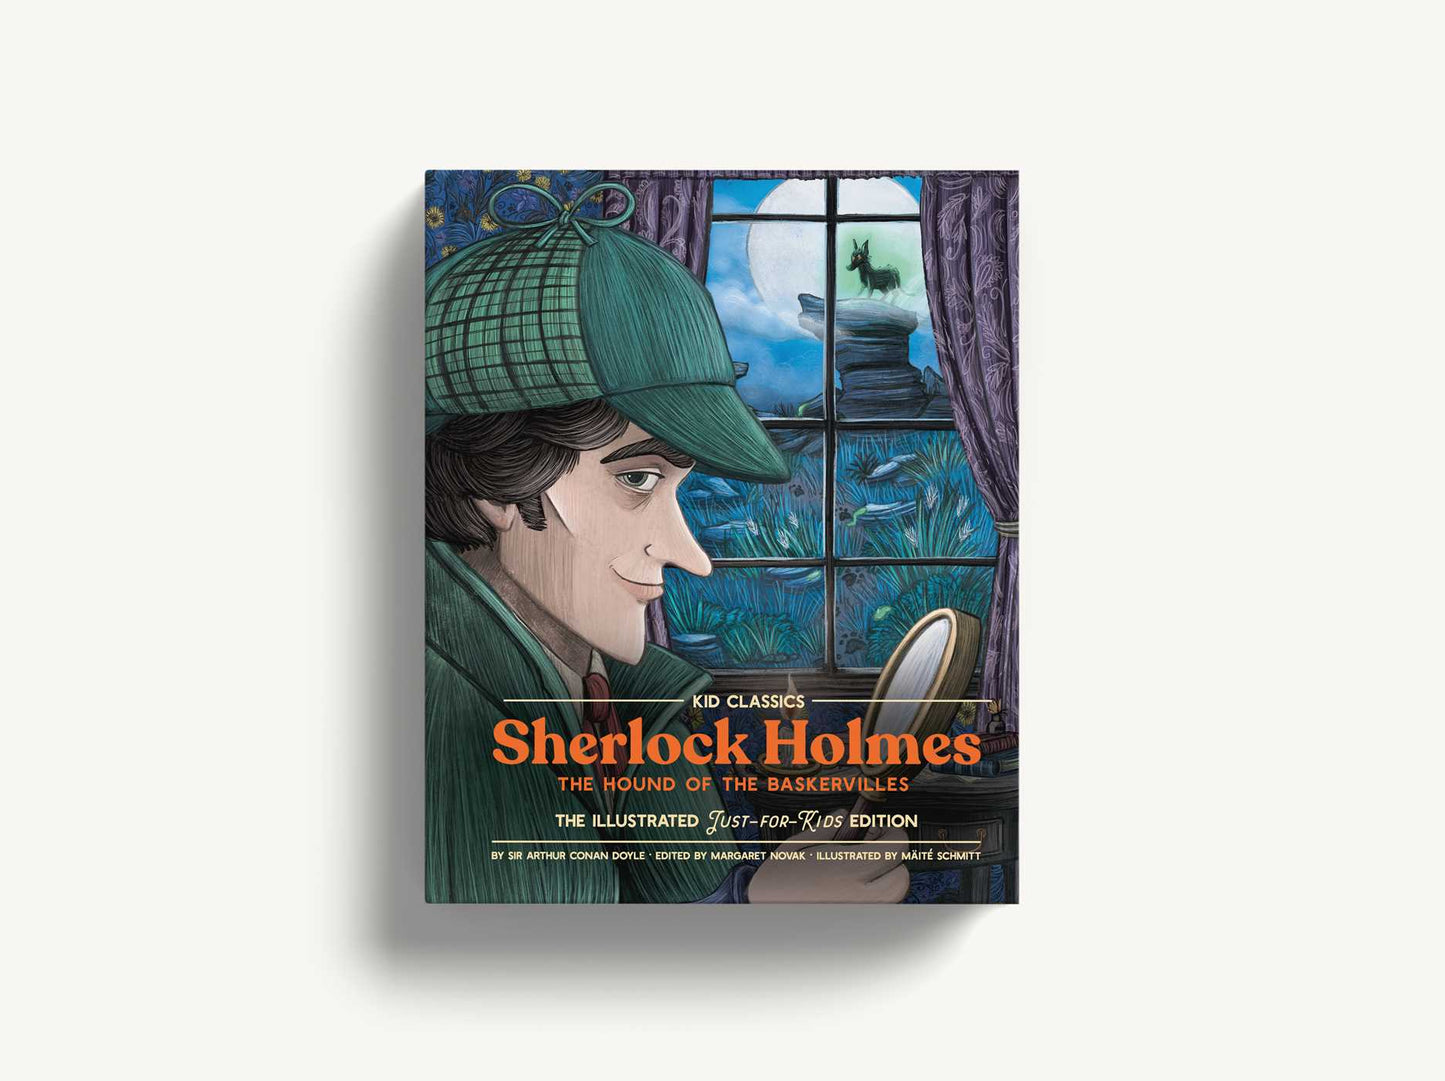 Sherlock (The Hound of the Baskervilles) - Kid Classics: The Classic Edition Reimagined Just-for-Kids! (Kid Classic #4)